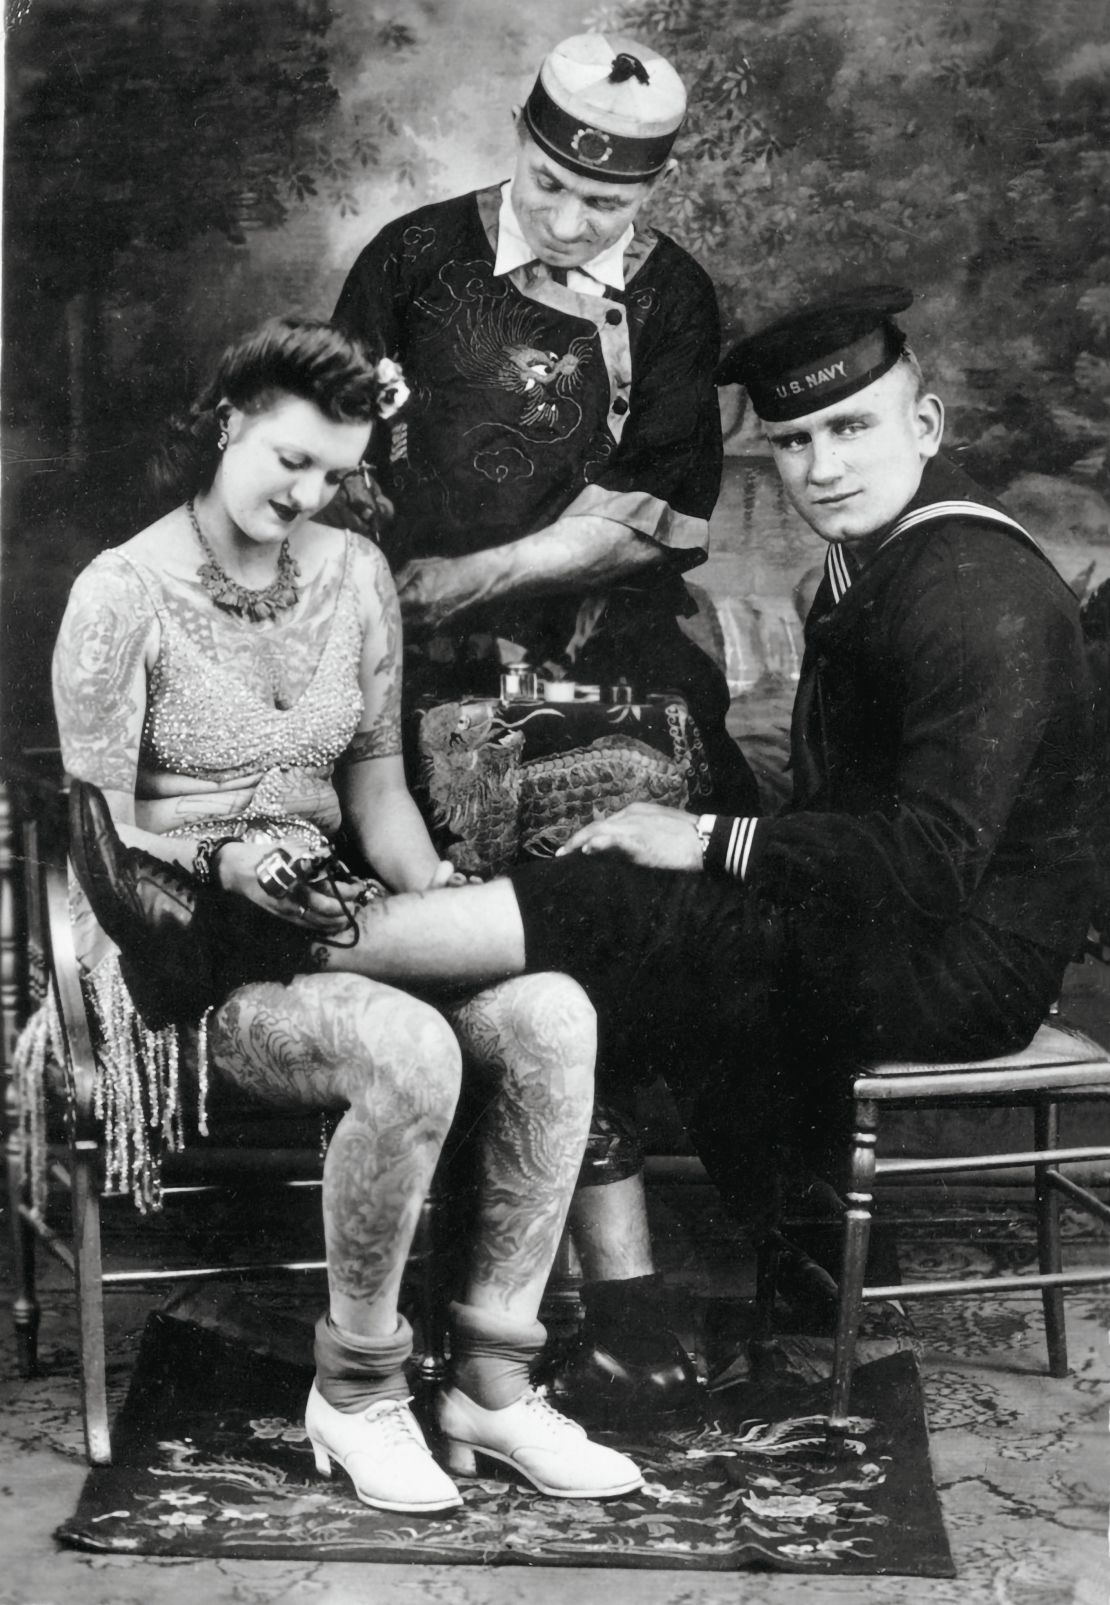 American tattoo artist Charlie Wagner, center, with a tattooed woman and American sailor, ca. 1930s.